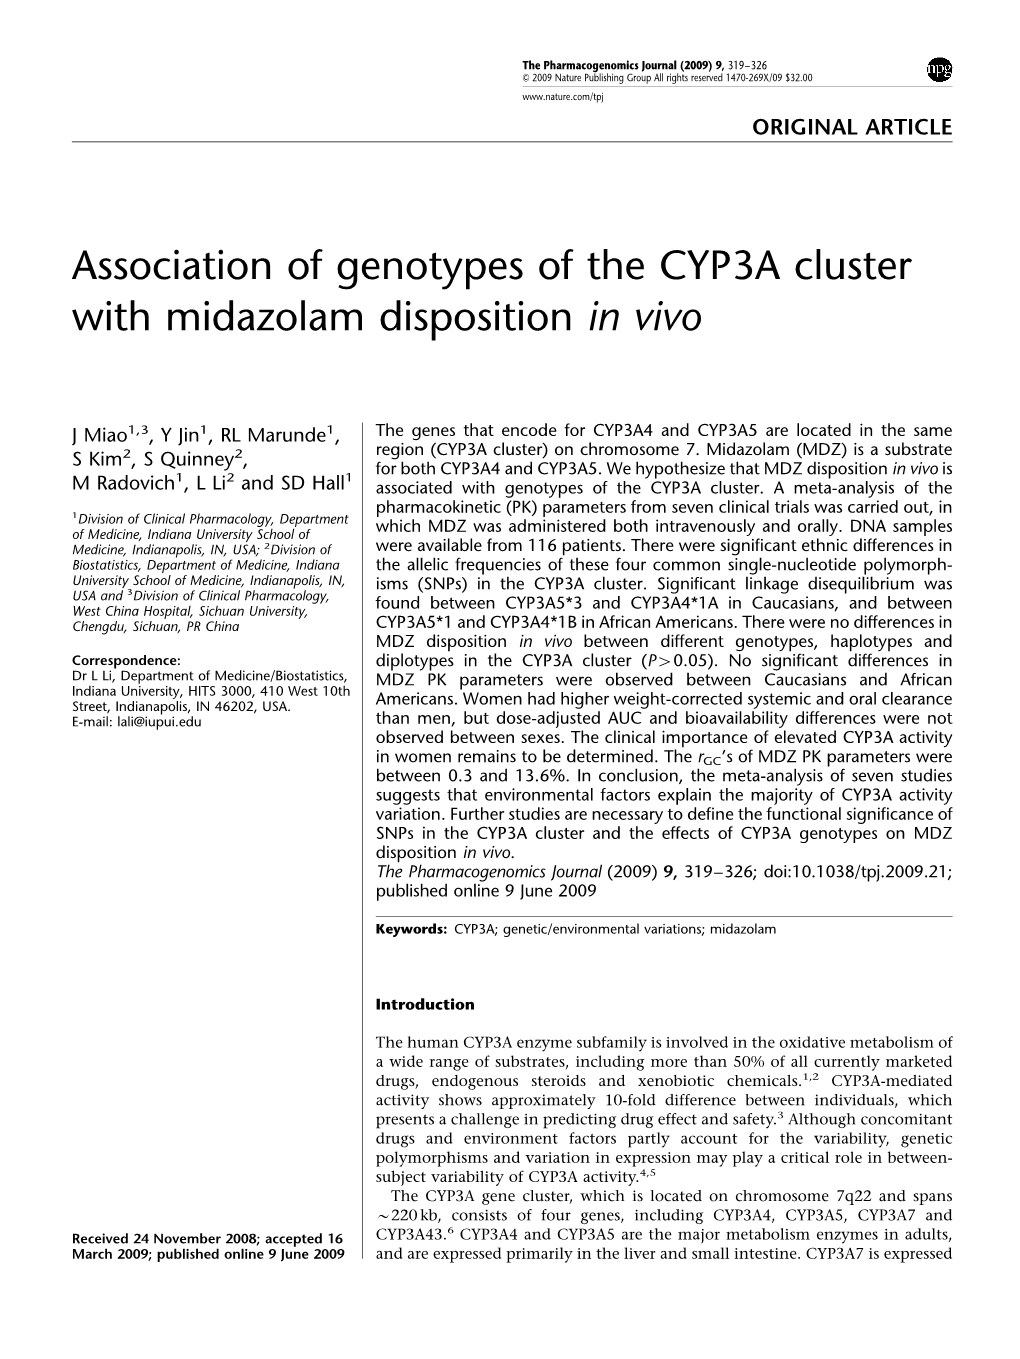 Association of Genotypes of the CYP3A Cluster with Midazolam Disposition in Vivo